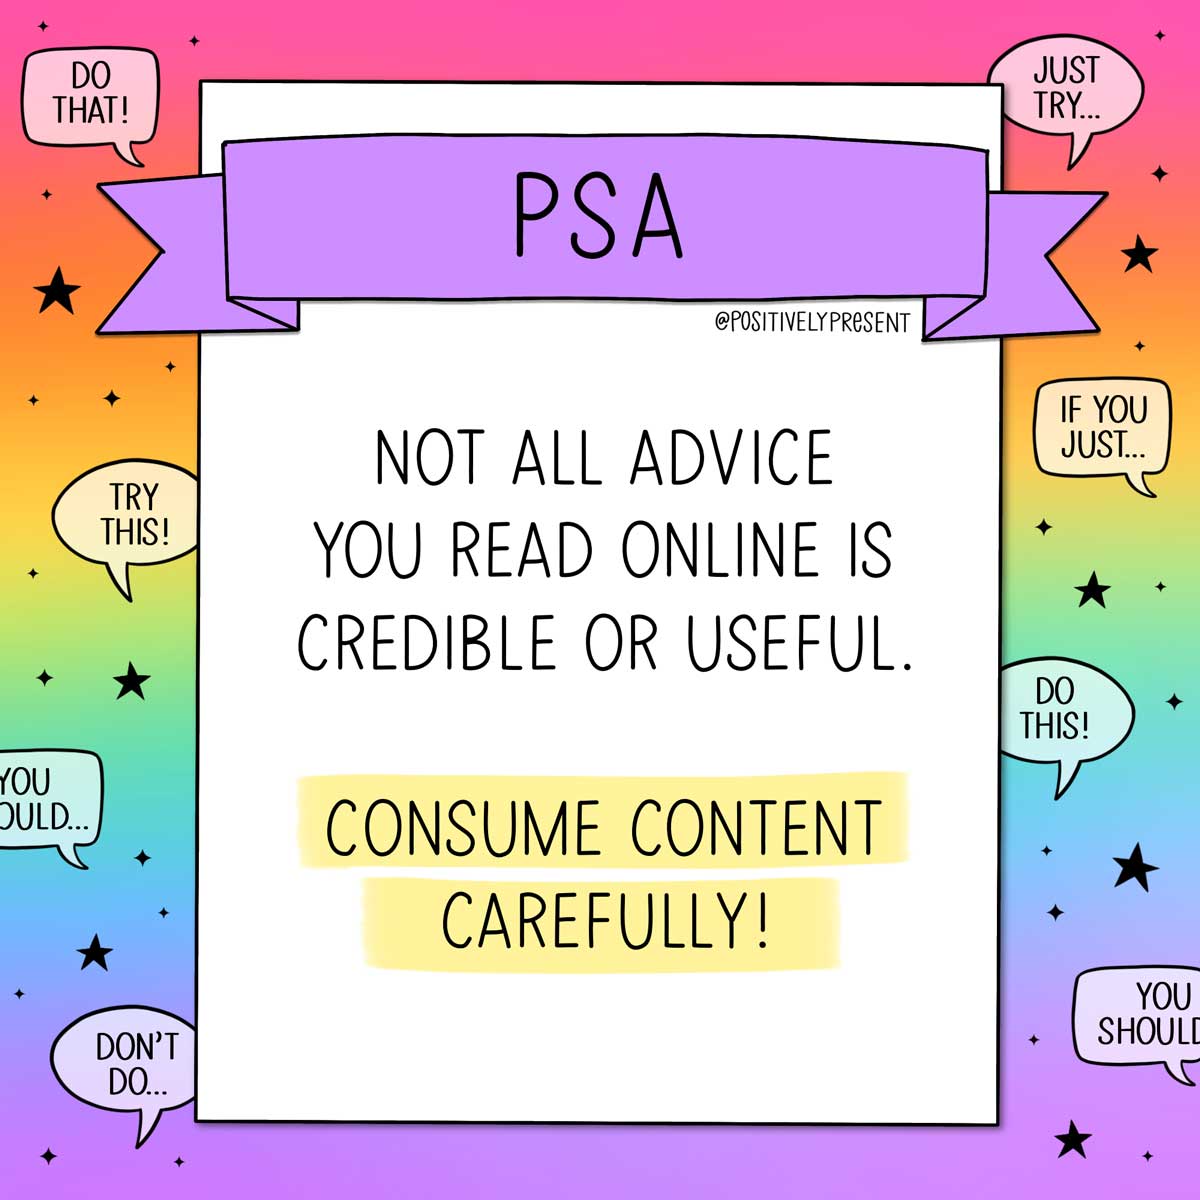 not all advice online is useful quote on colorful illustration.